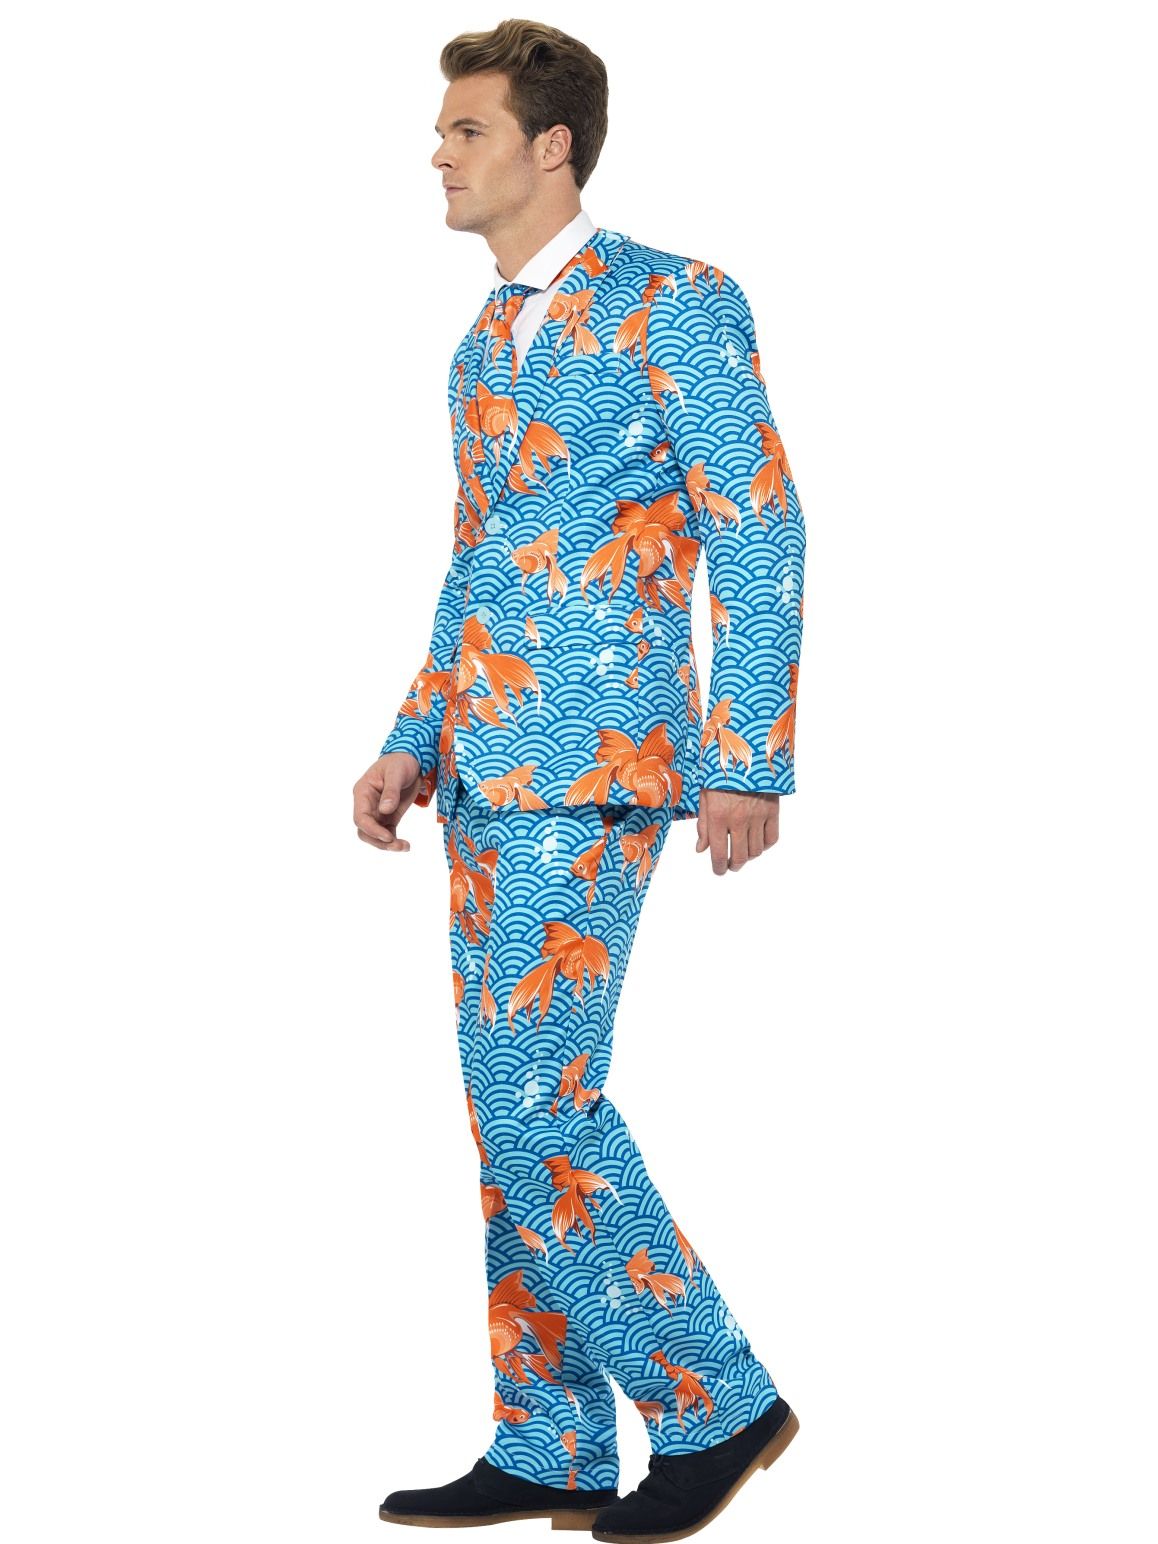 Goldfish Men's Stand Out Suit Stag Ocean Under The Sea Fish Formal ...